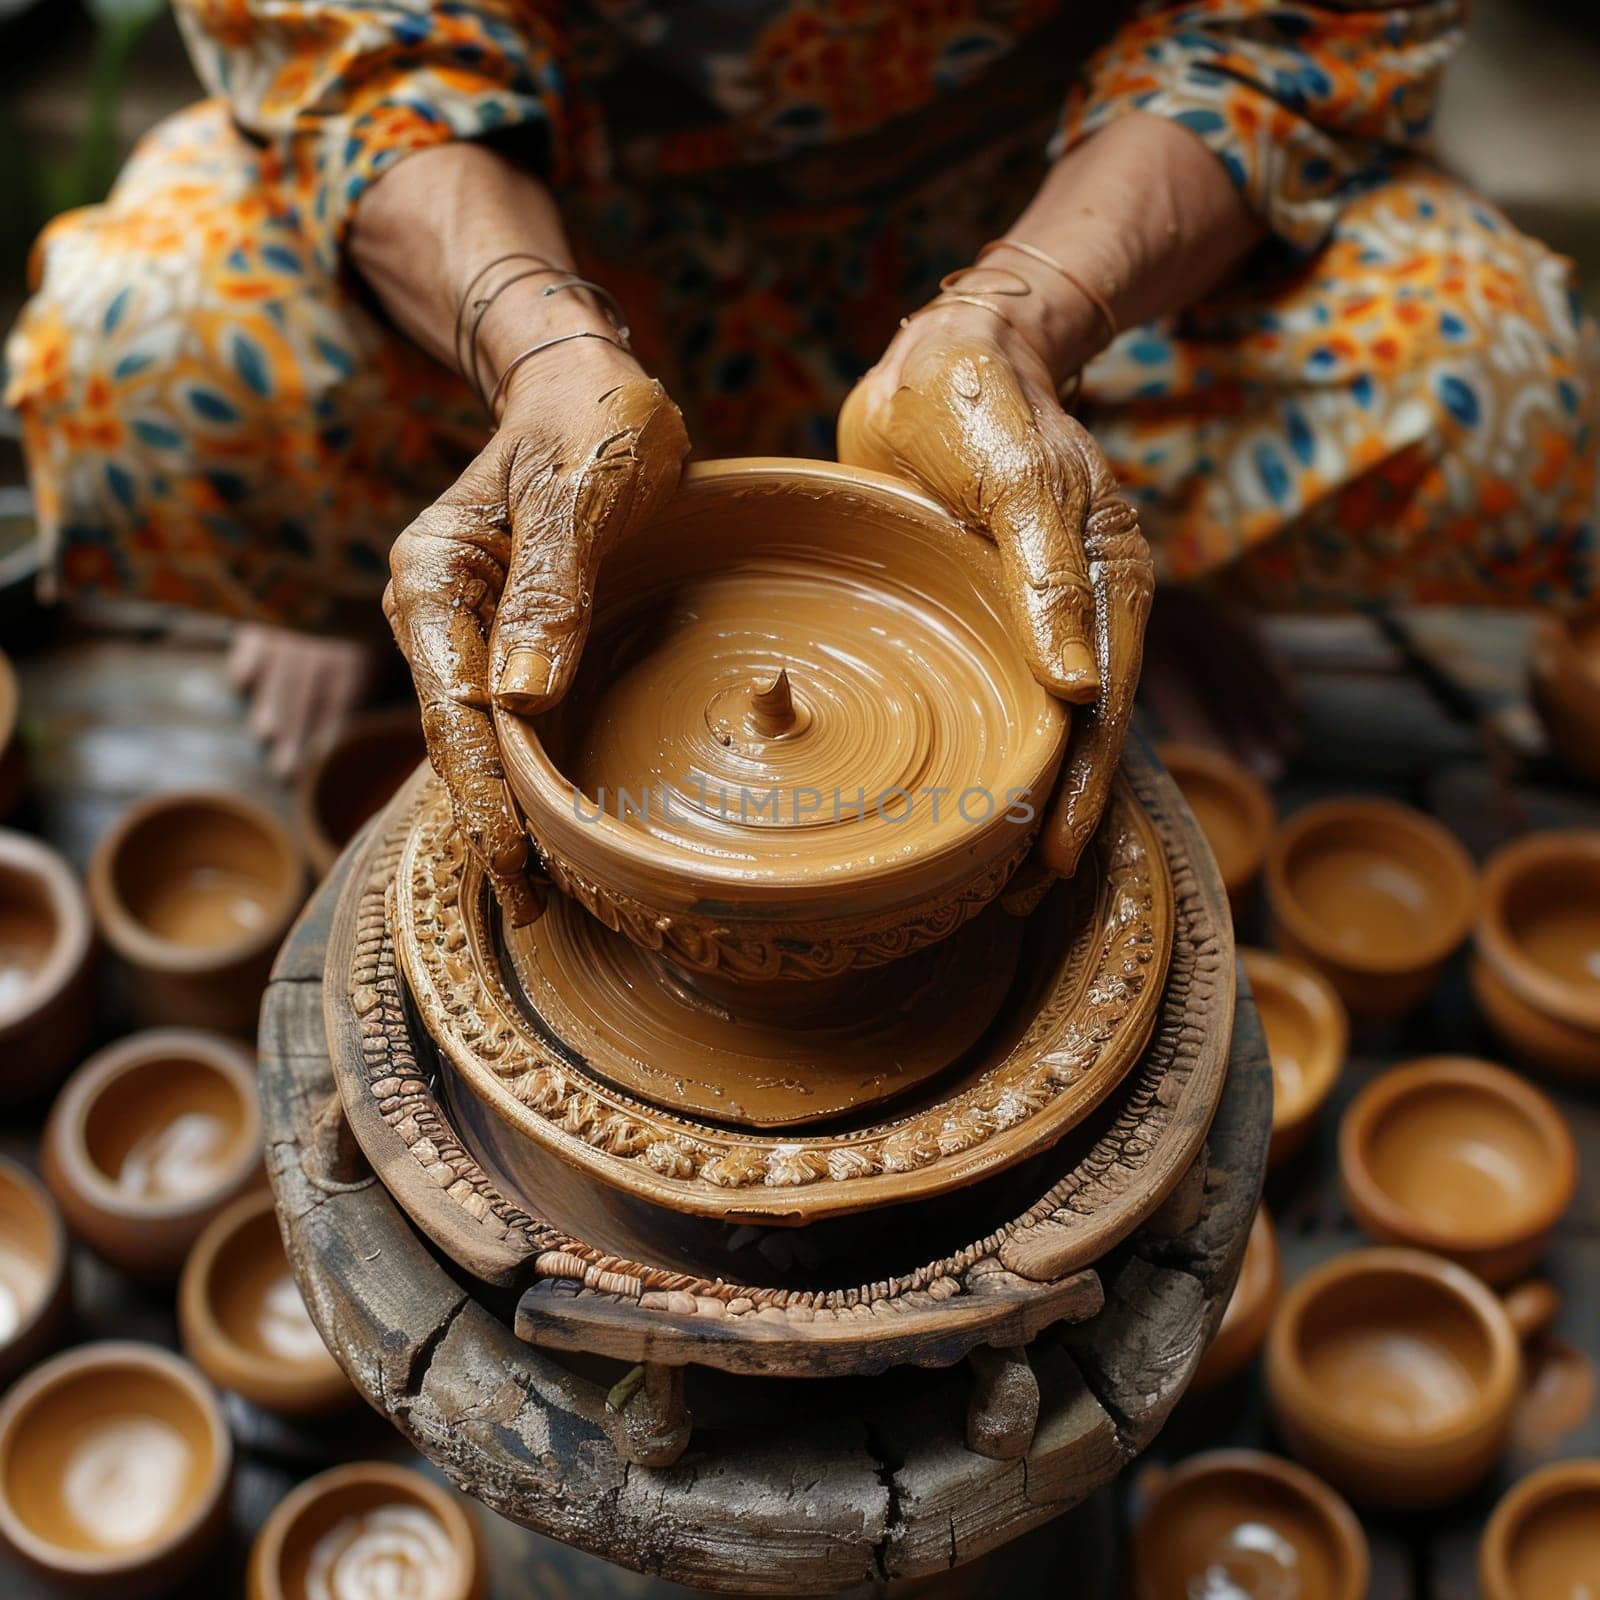 A skilled woman is delicately shaping a pot out of clay, molding and sculpting with precision and care by but_photo